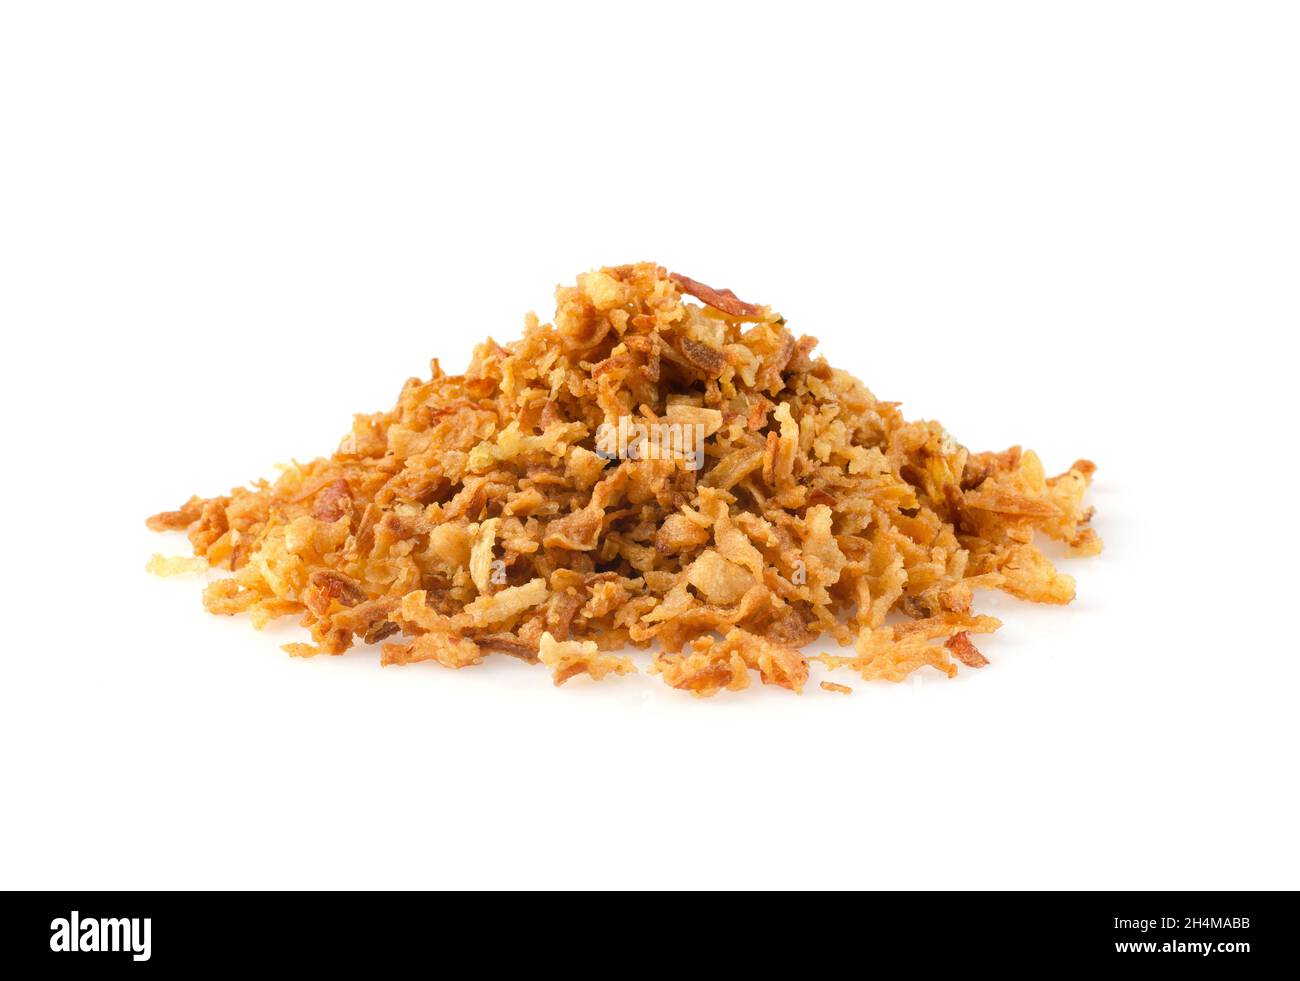 Pile of fried gold onion or shallots isolated on white background Stock Photo